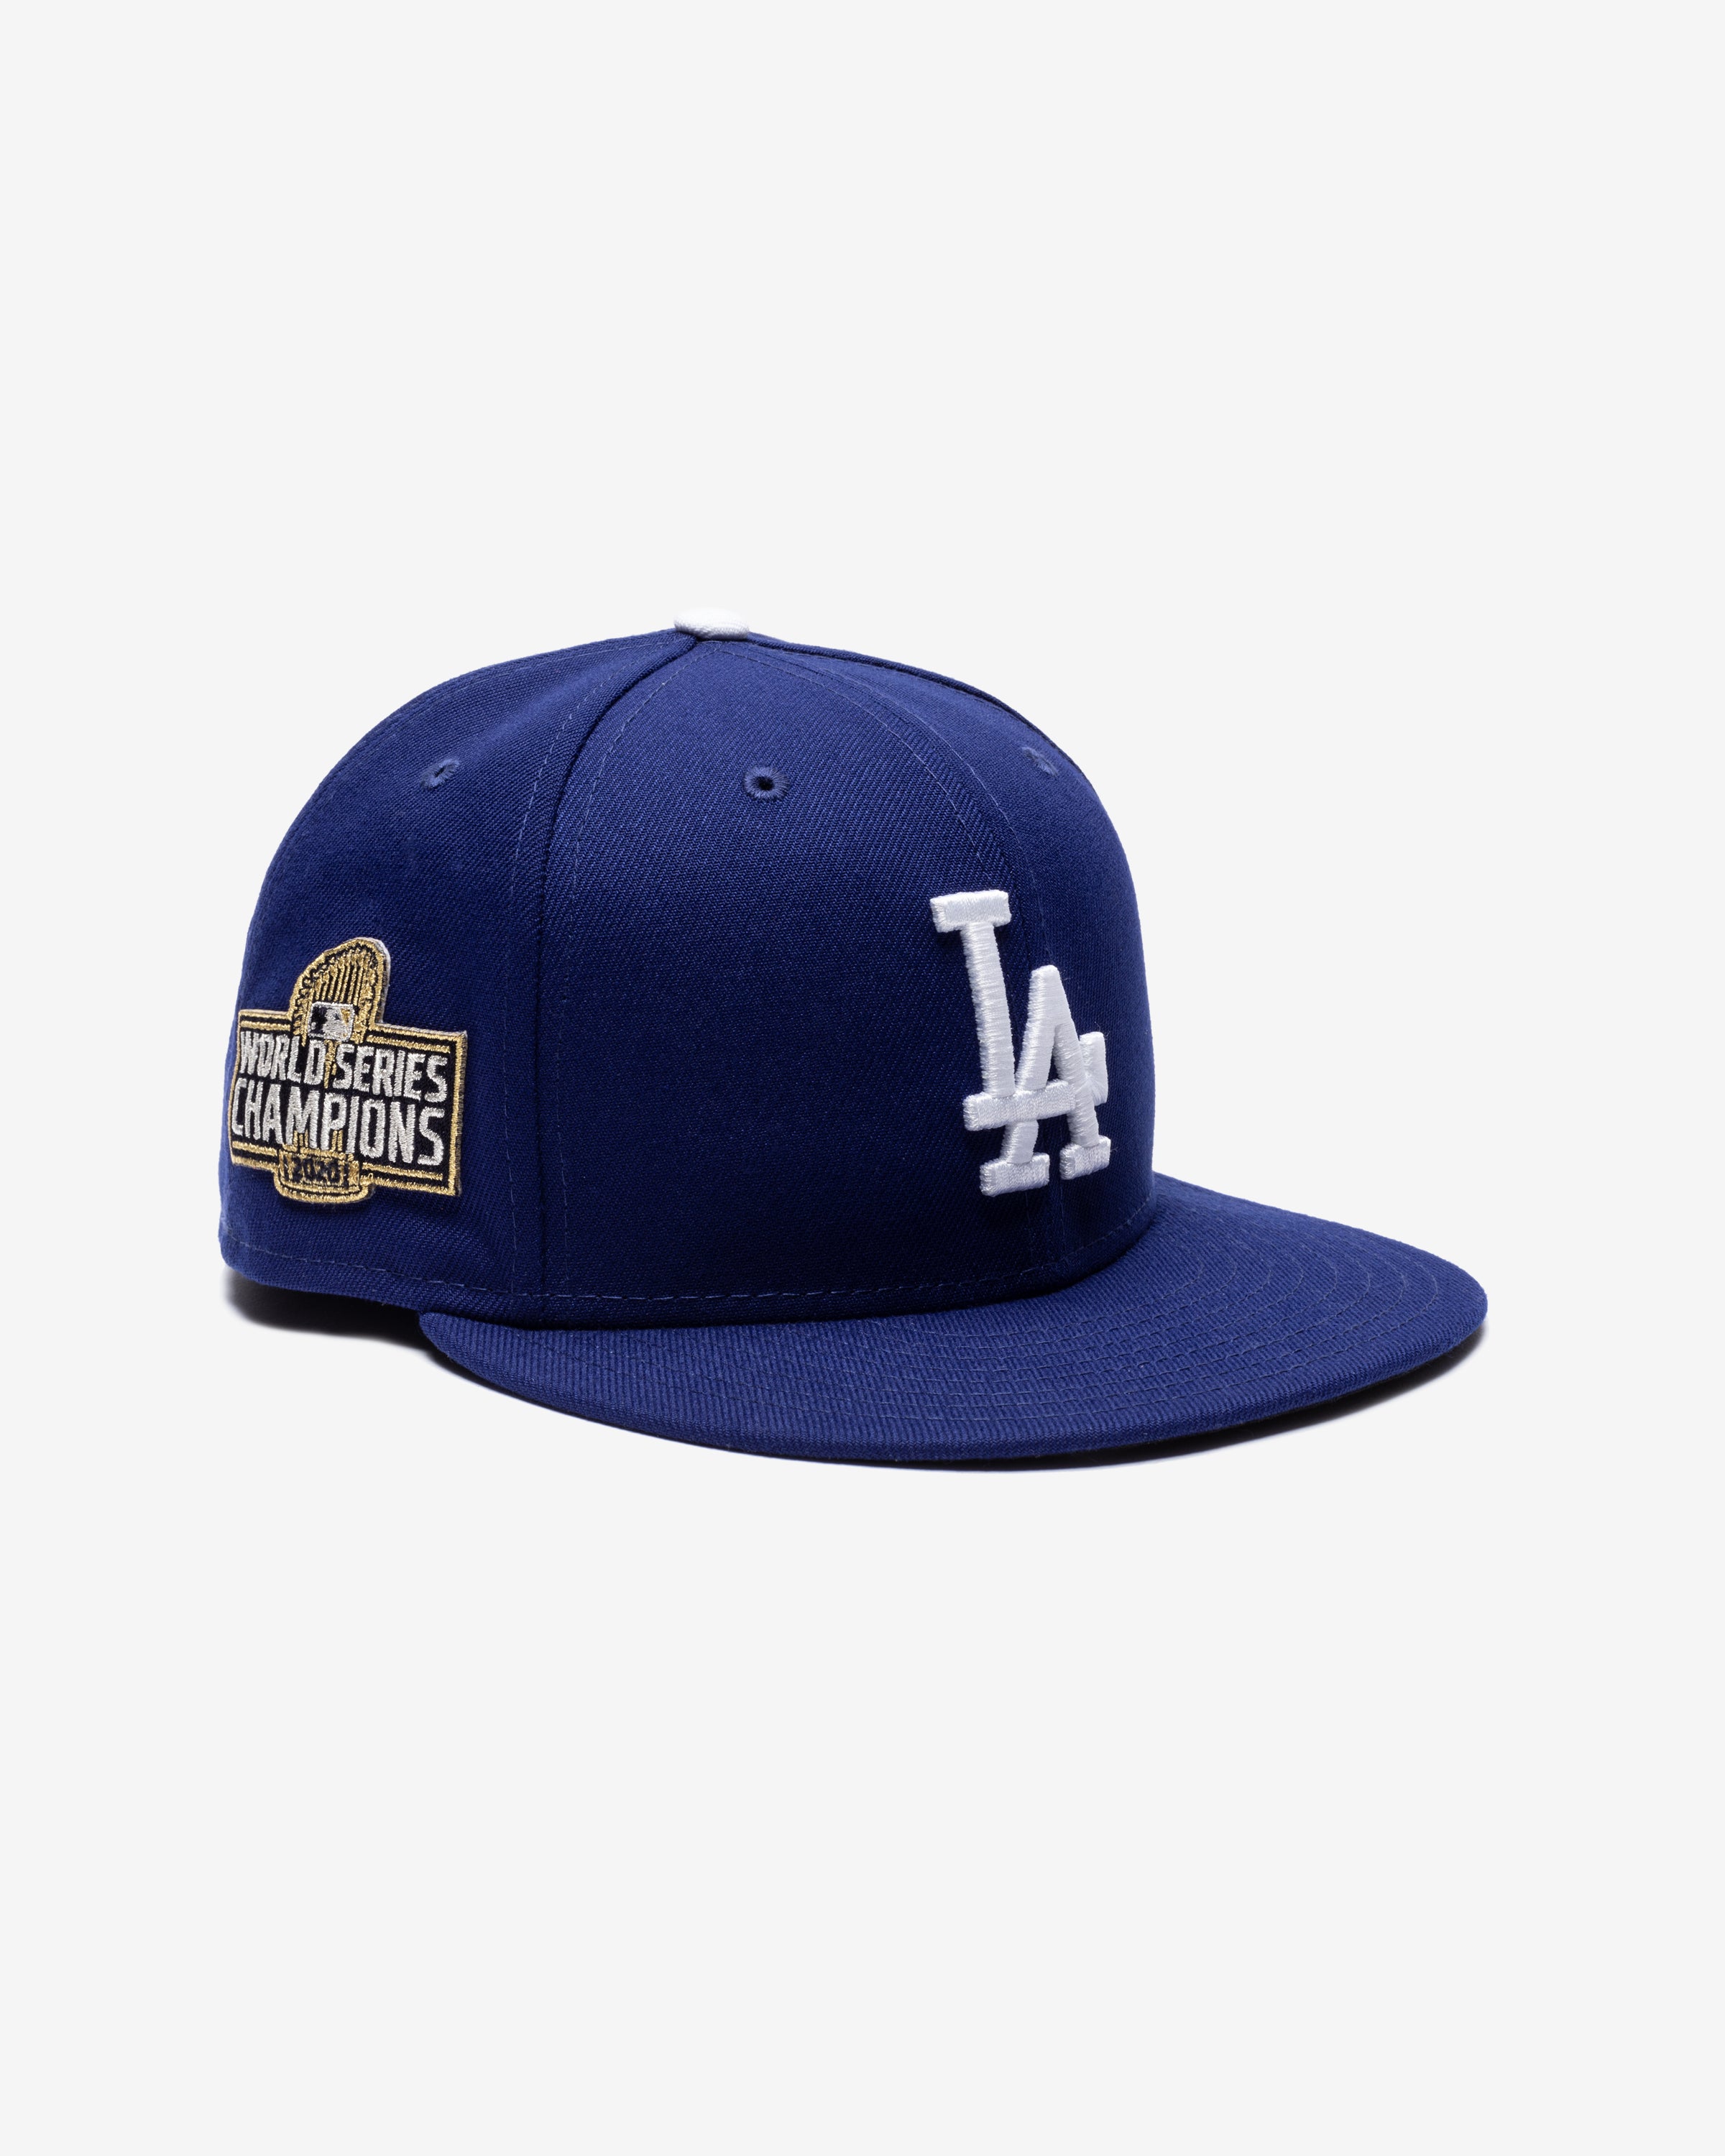 Our collaboration with NewEra and the Los Angeles Dodgers drops